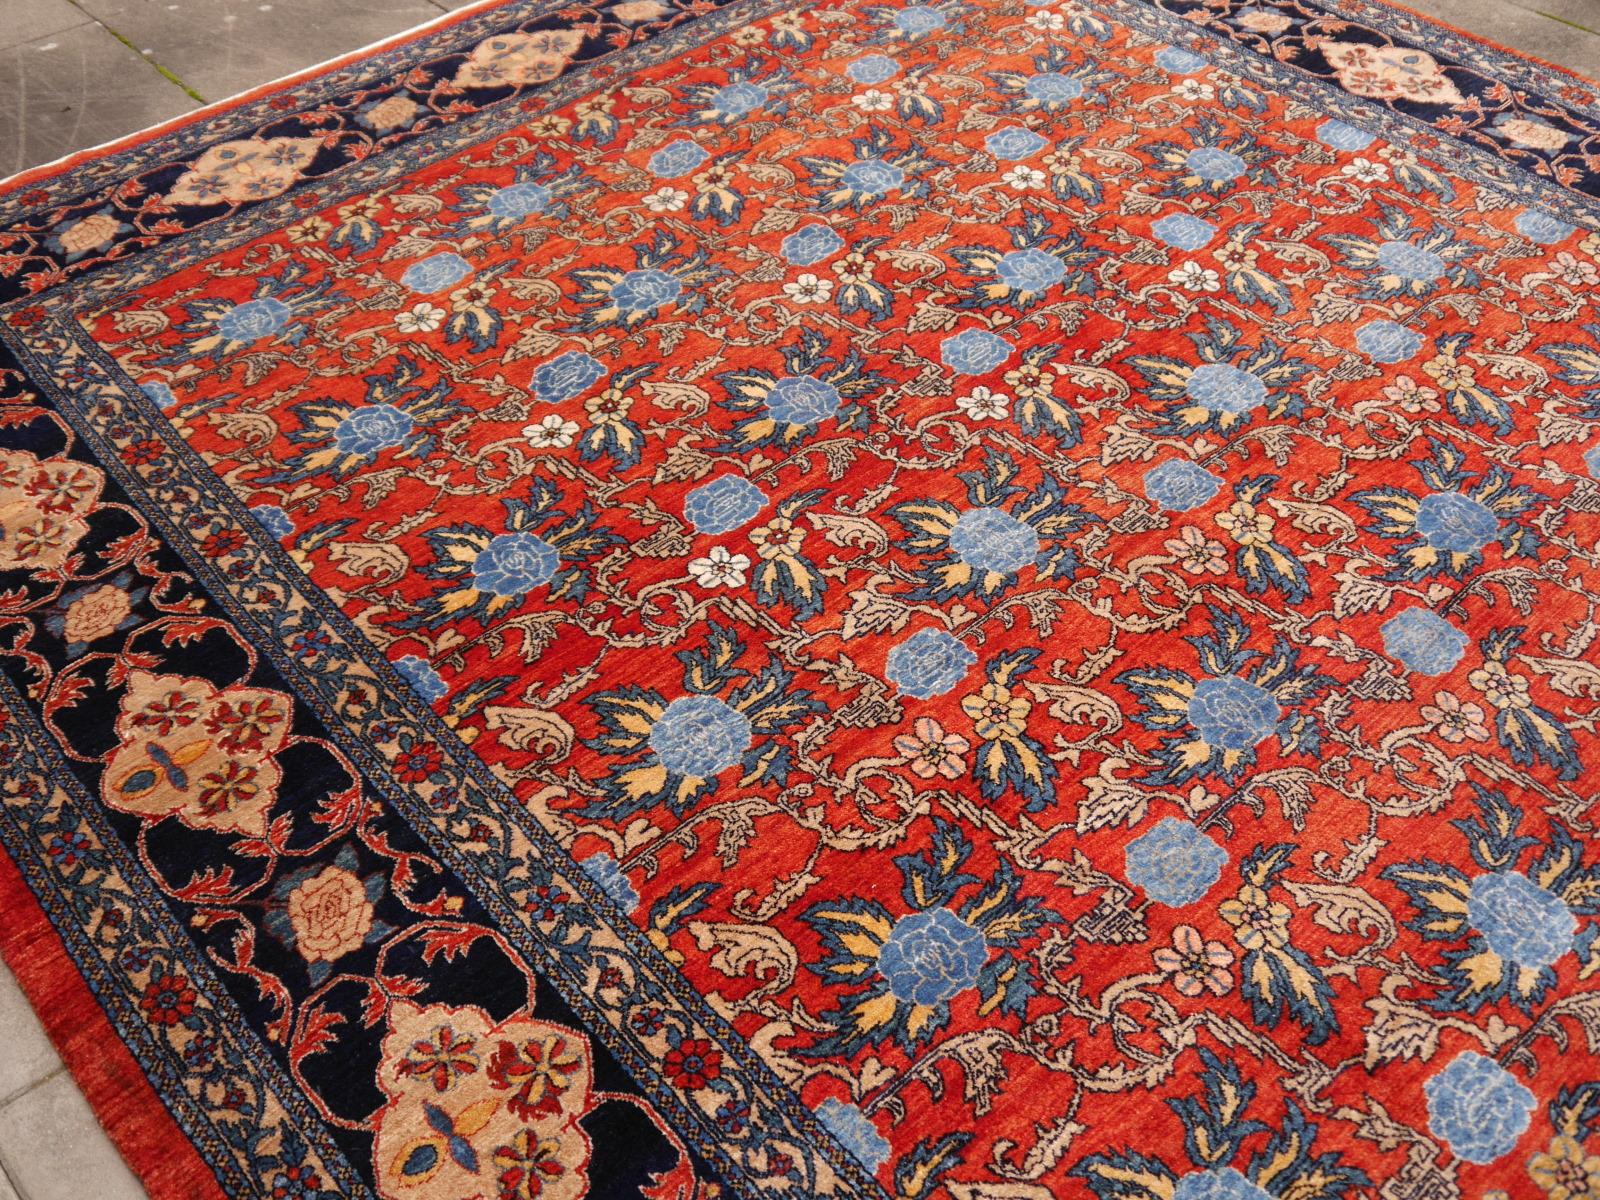 Vintage Turkish Azeri rug

A beautiful Turkish Azeri rug from eastern Anatolia. Best quality wool and vegetable dyes. Azeri rugs are a re-birth of traditional rug making in Turkey, pushed by dealers who ordered high class rugs for the US market.
 
•